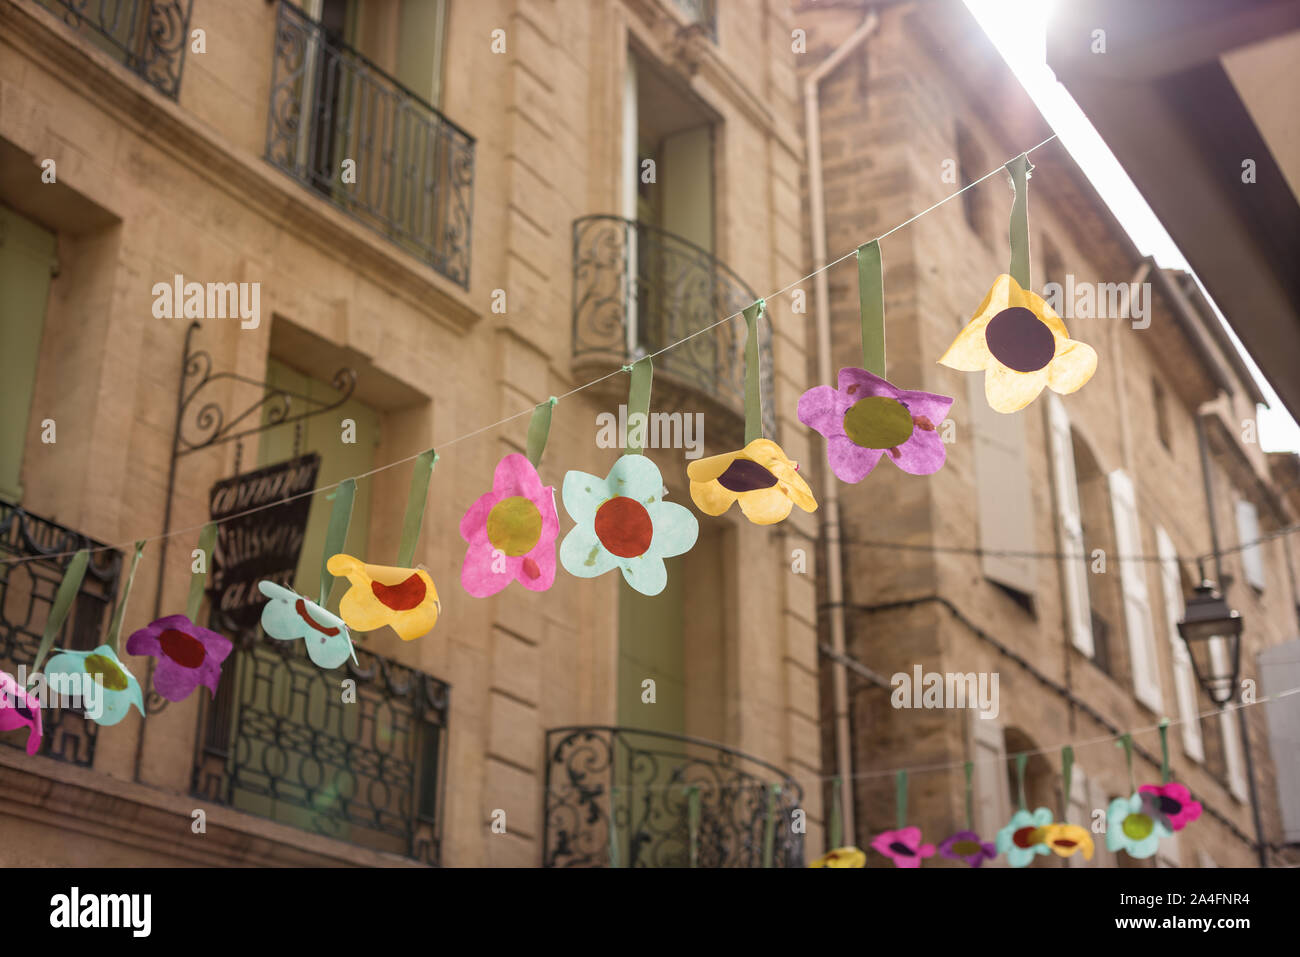 Hanging flower decorations in street in south of France Stock Photo